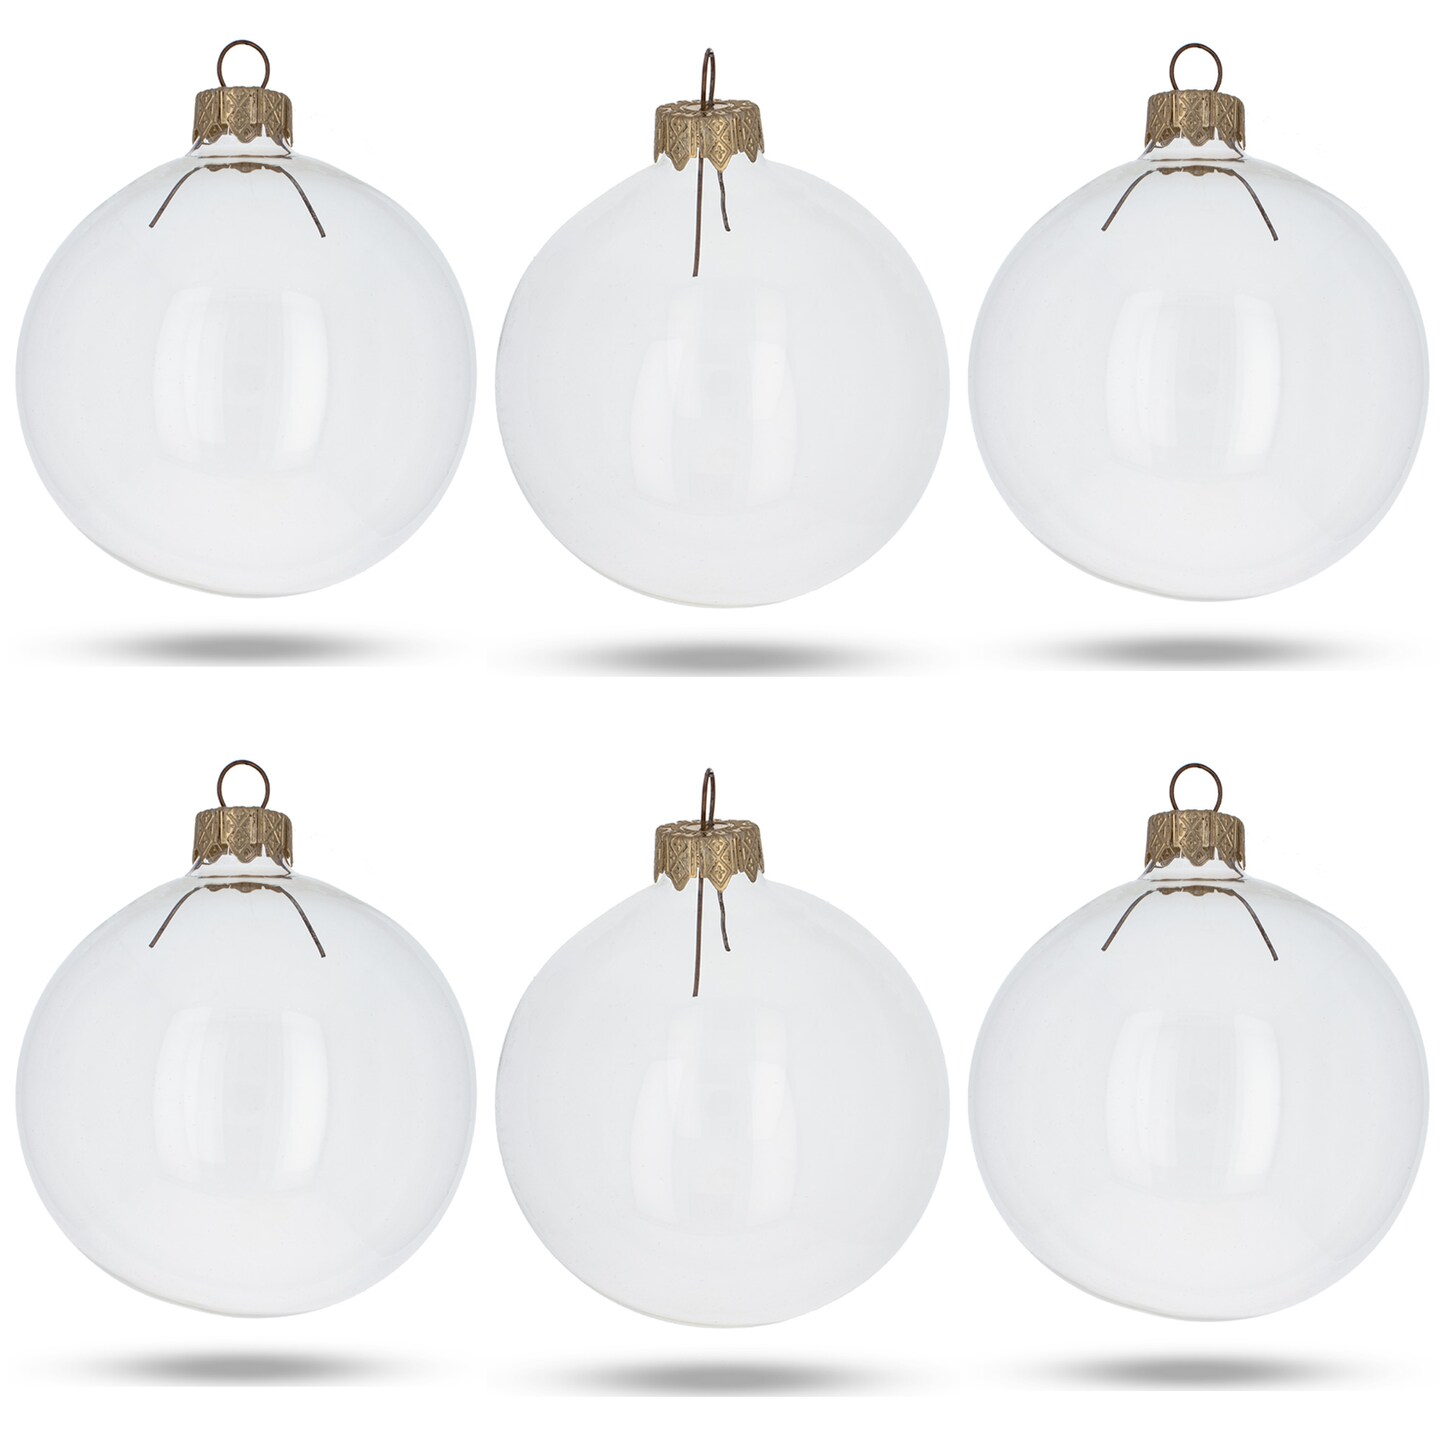 Set of 6 Clear Glass Ball Christmas Ornaments DIY Craft 3.25 Inches